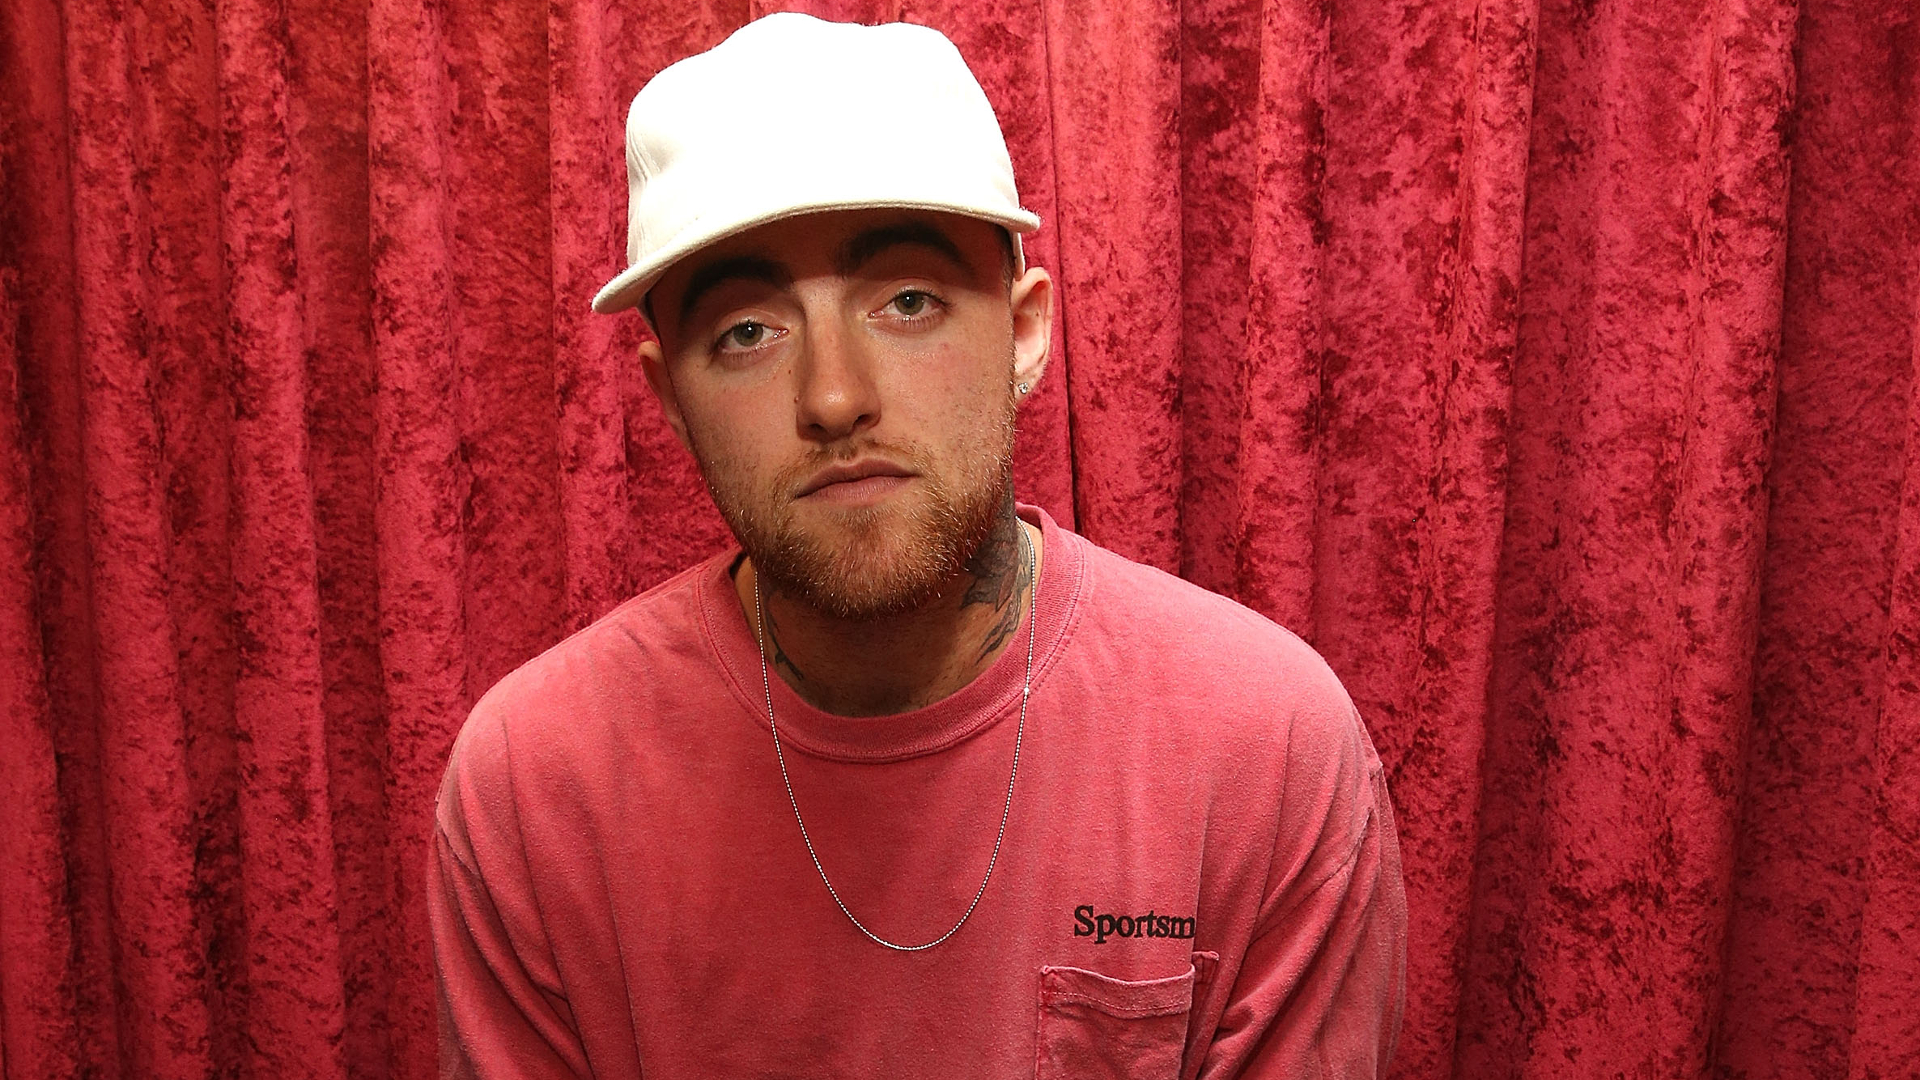 Mac Miller: Remembering the late rap icon on his 30th birthday